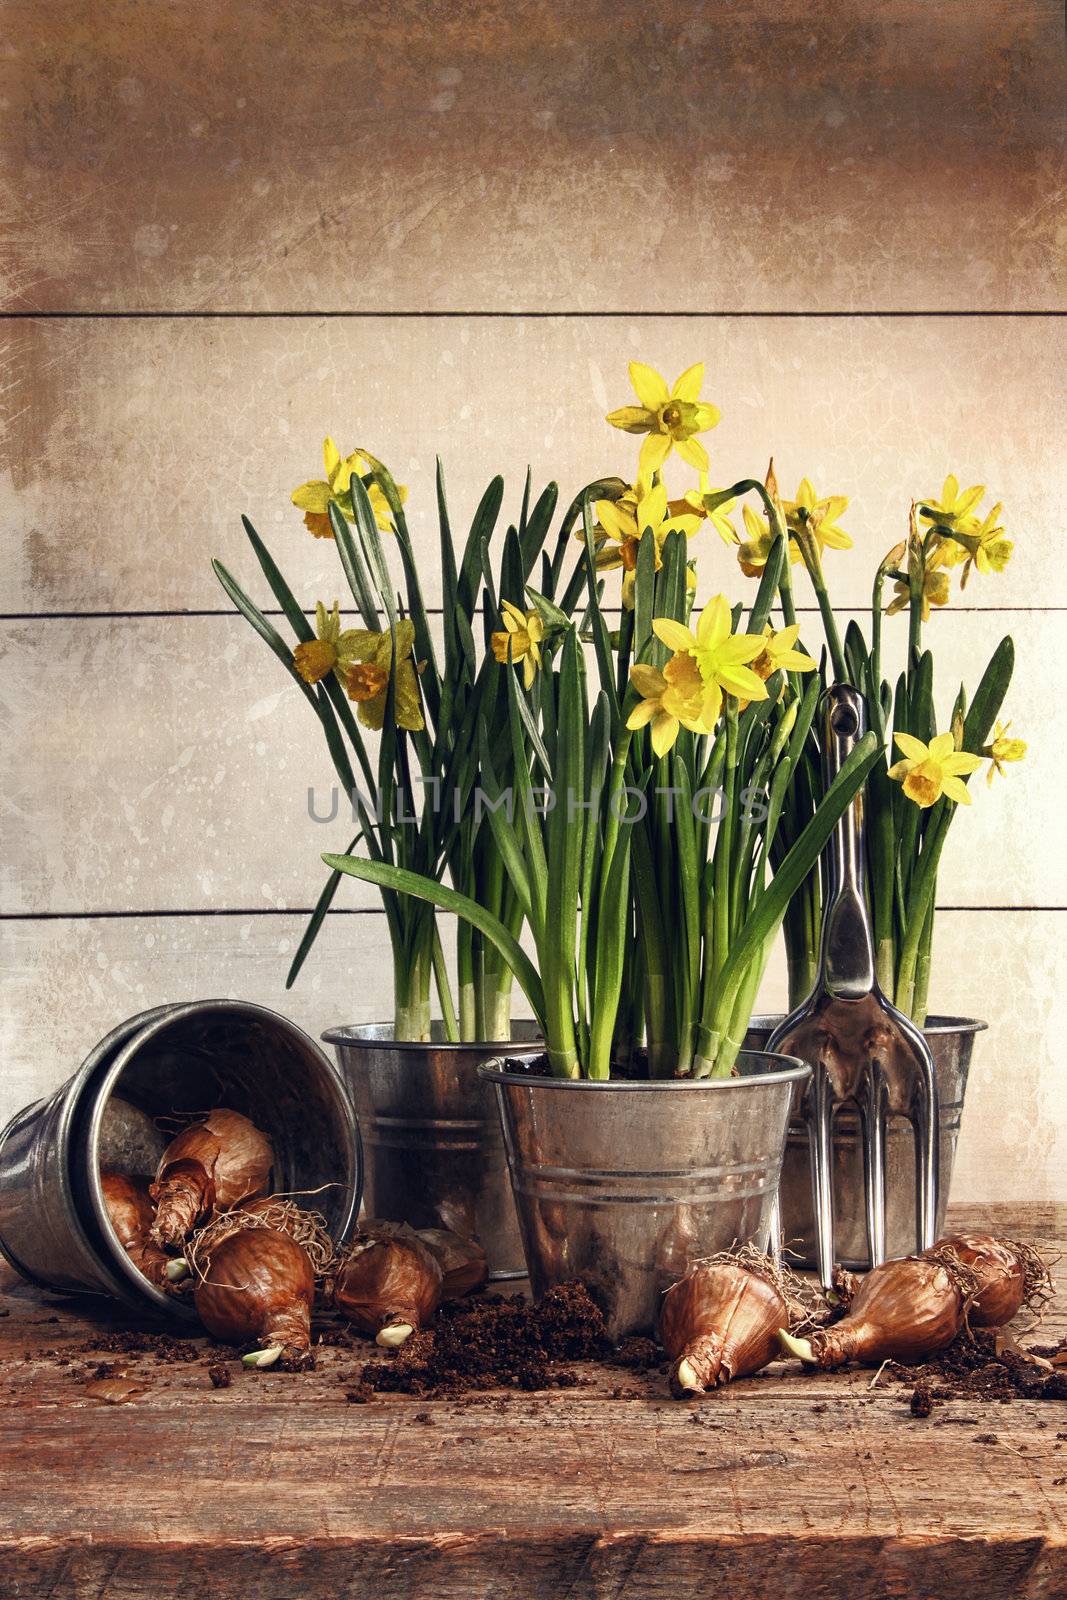 Potted daffodils with bulbs for planting